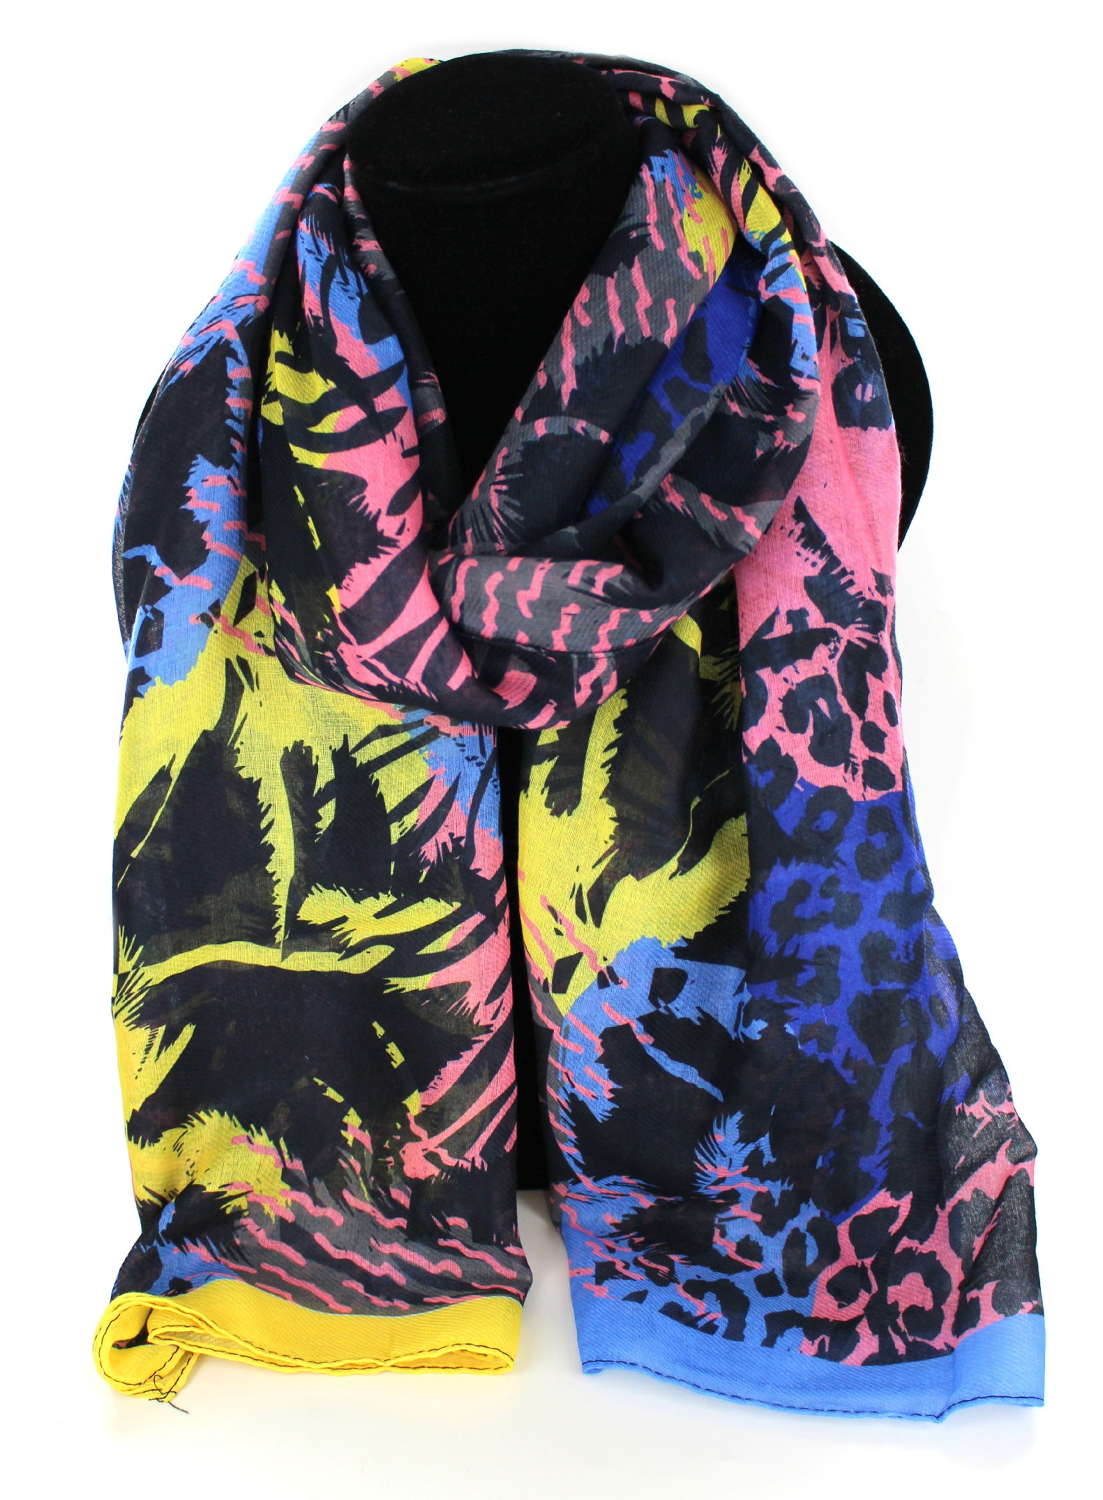 Mixed animal print scenic colourful recycled Polyester scarf.